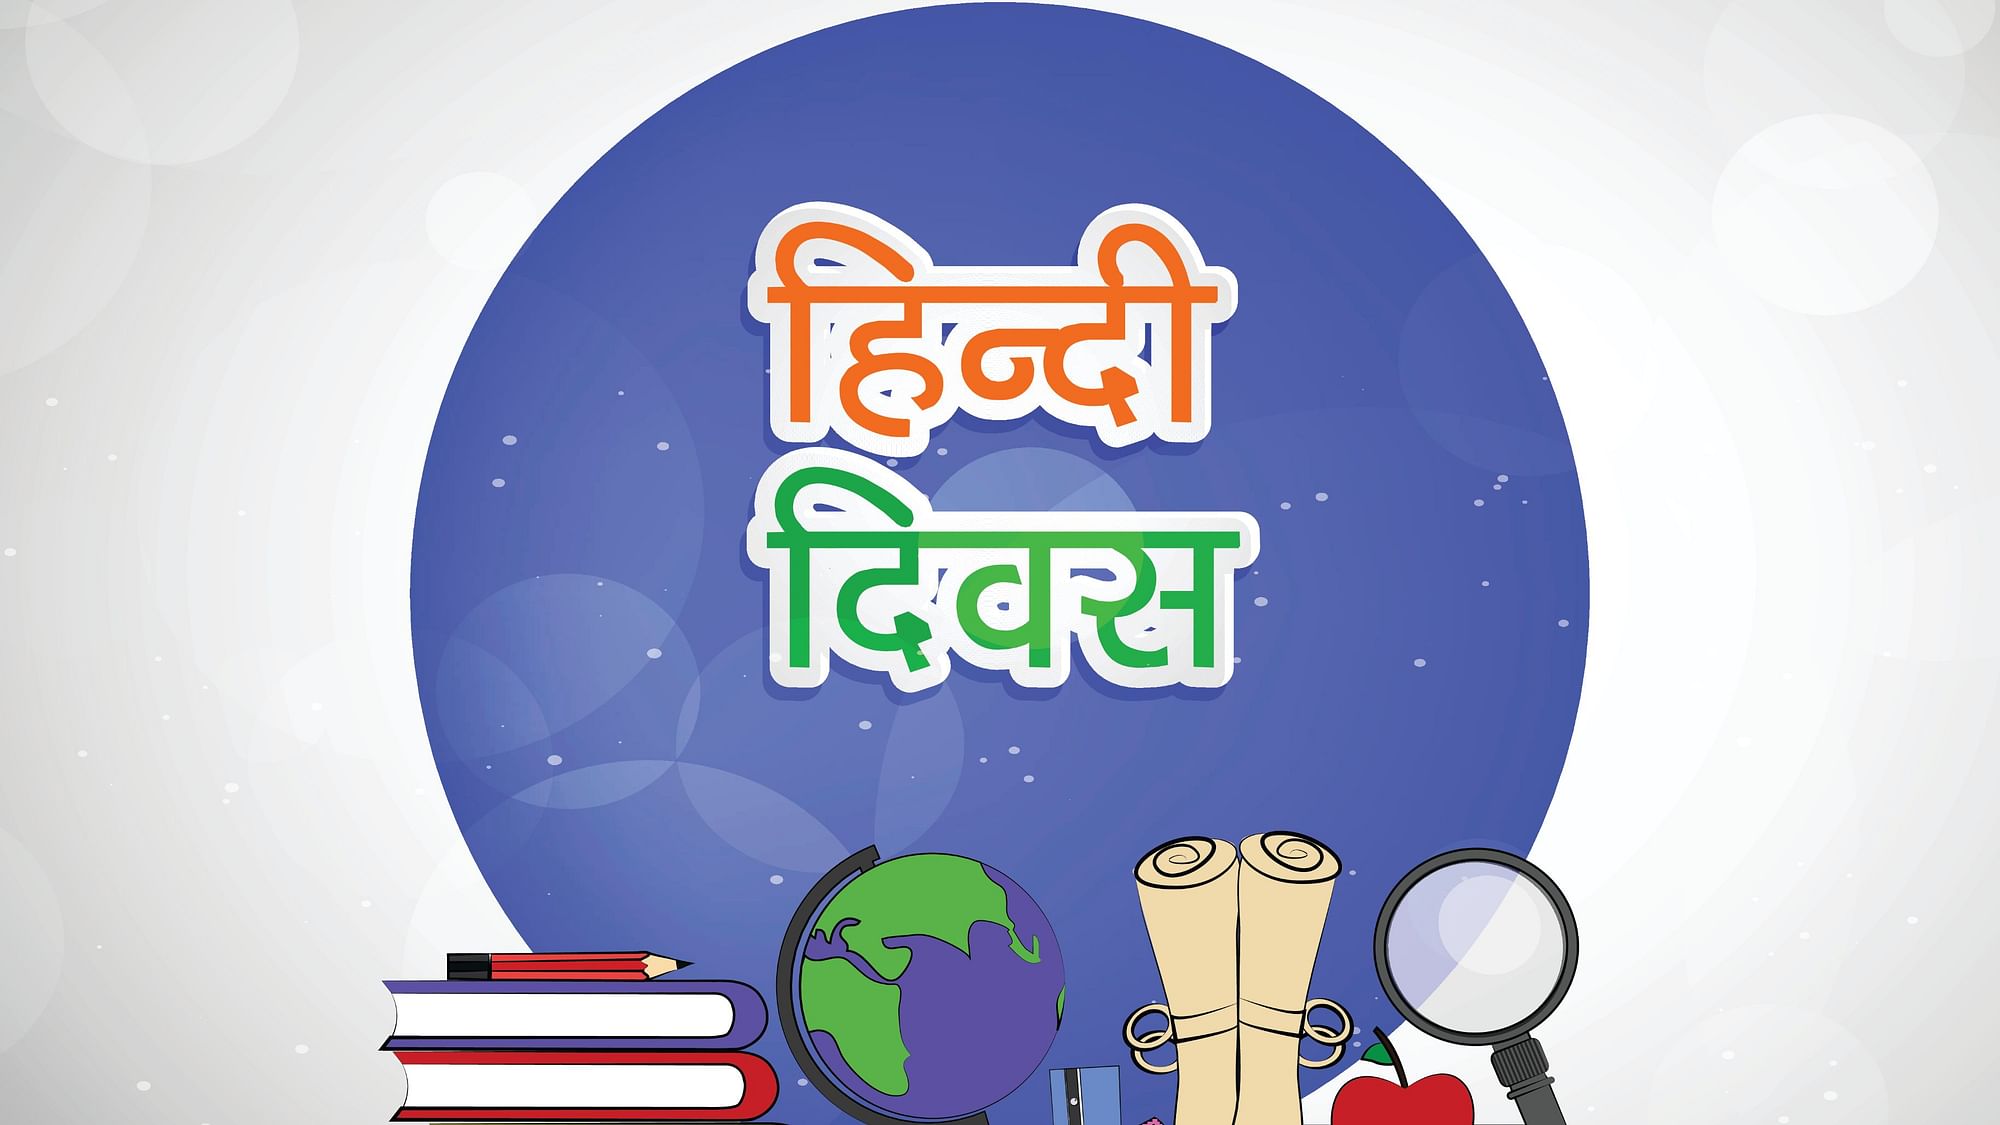 Hindi Diwas is celebrated on 14 September each year in India.